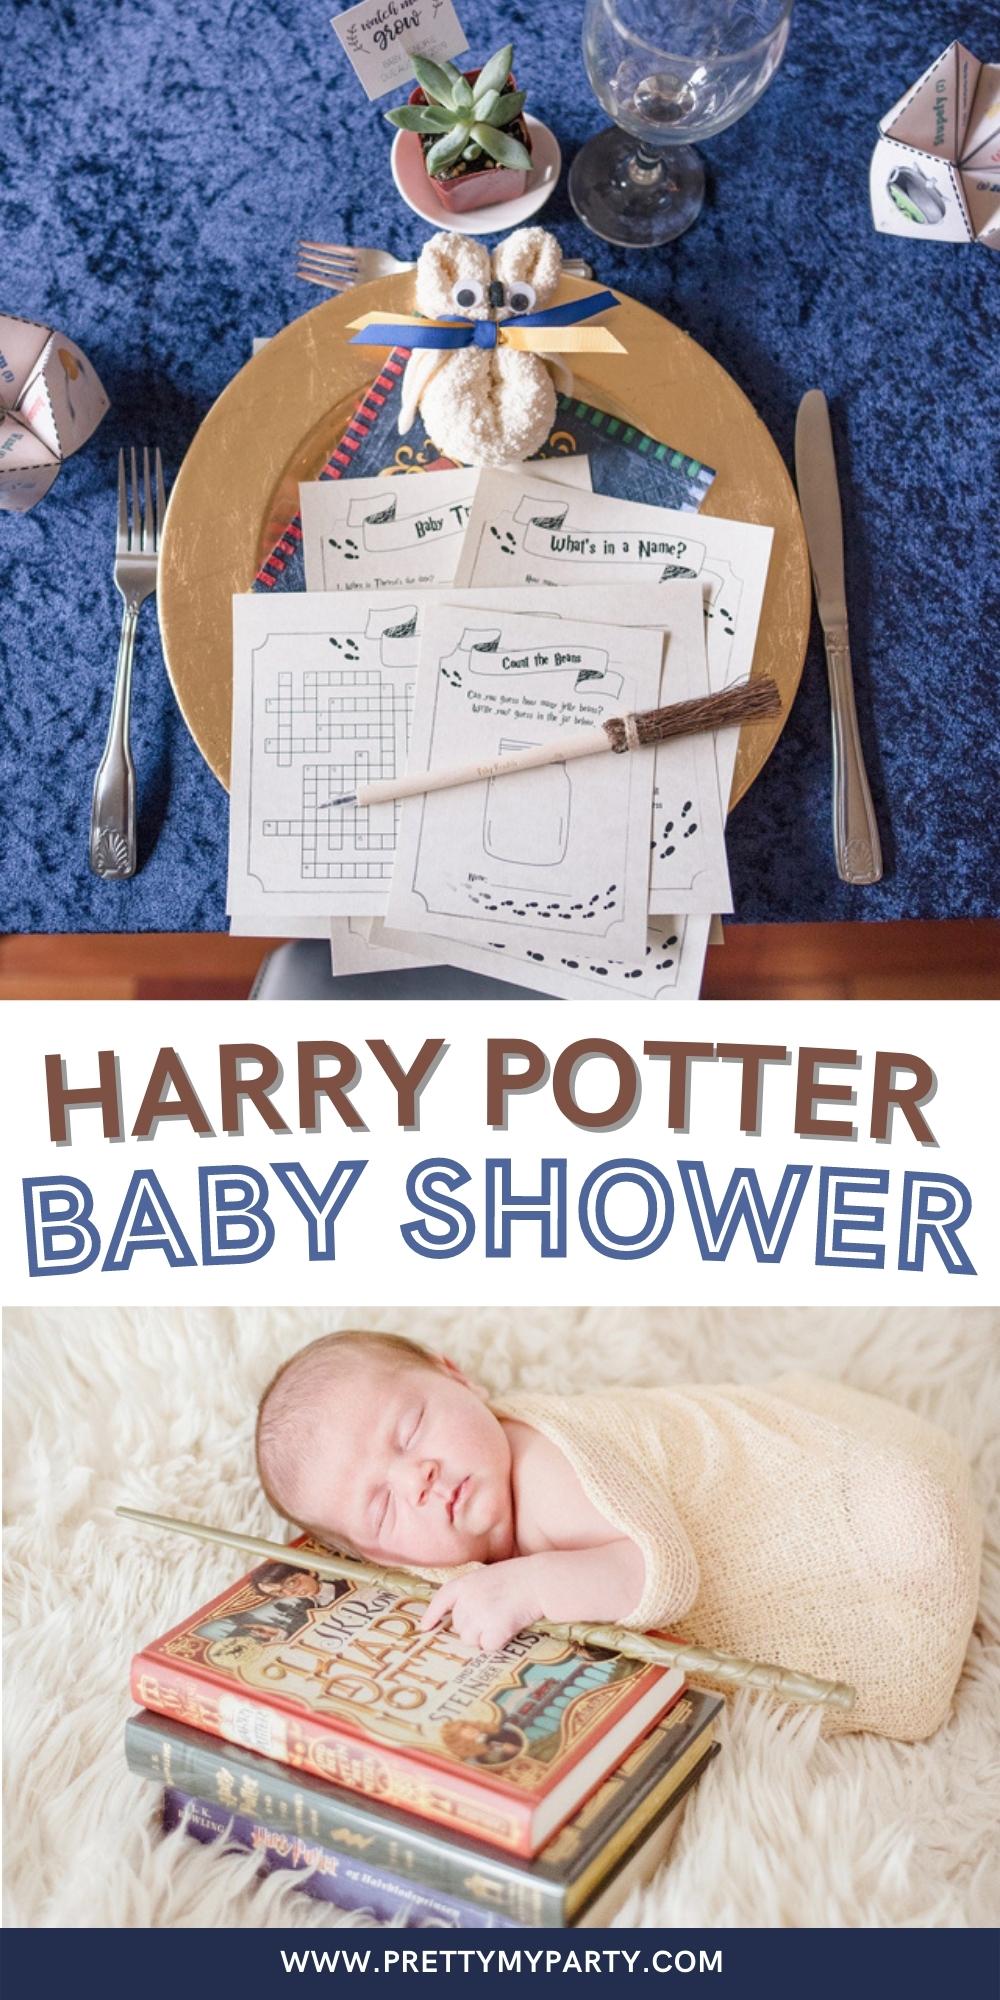 https://www.prettymyparty.com/wp-content/uploads/2020/03/Harry-Potter-Baby-Shower-Pretty-My-Party-1.jpg